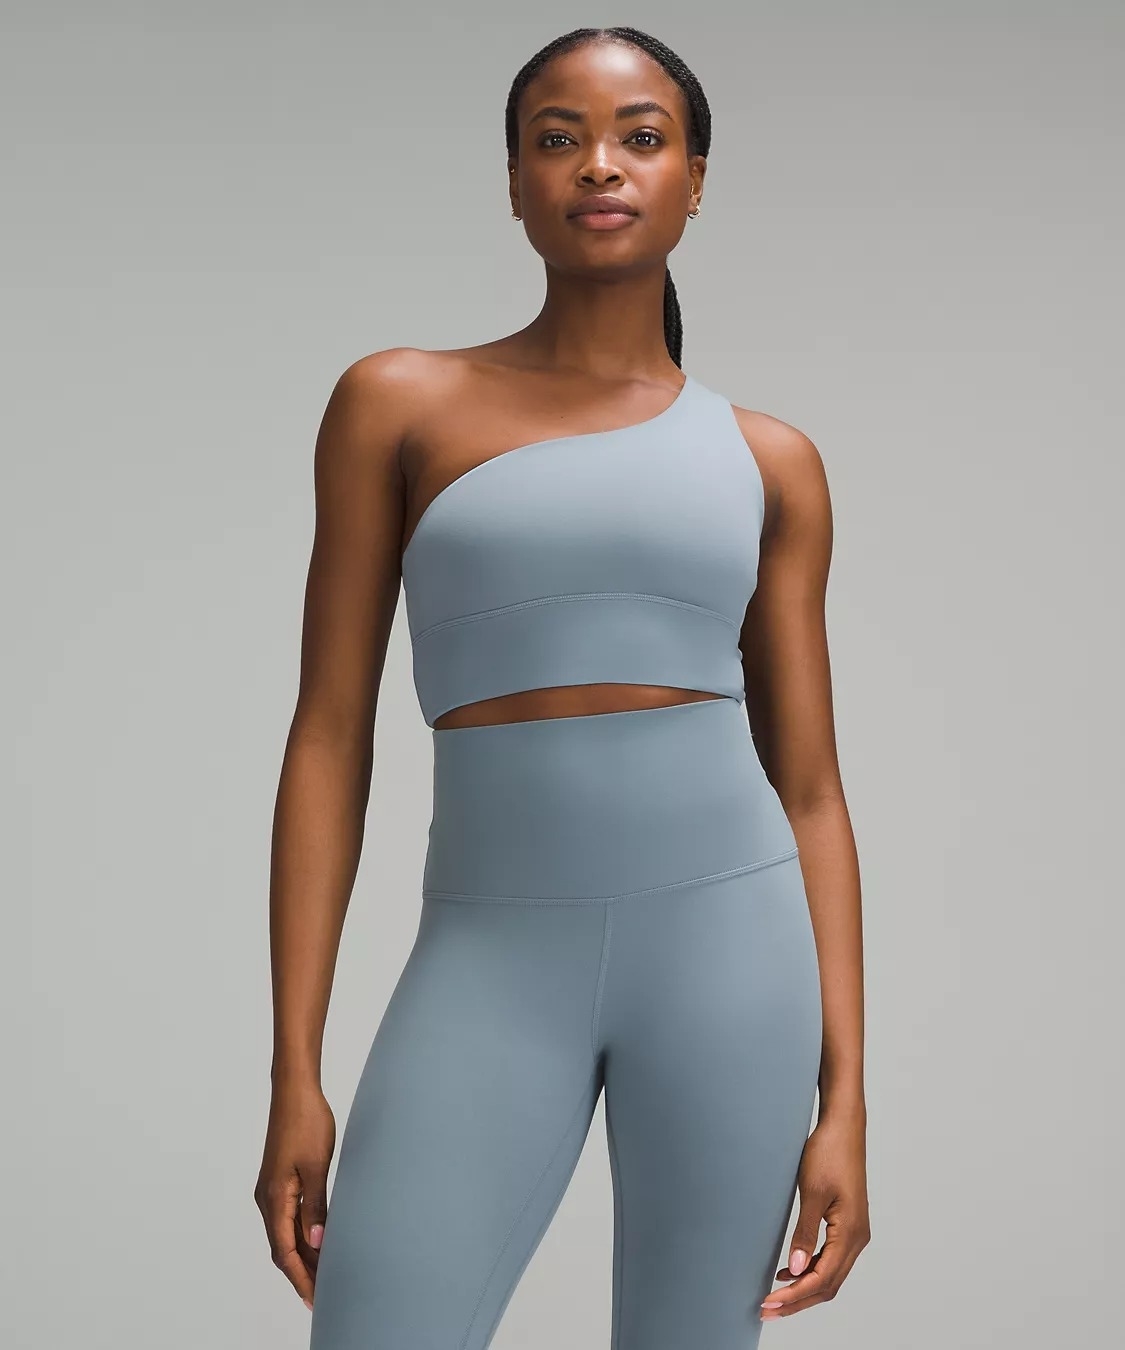 Model in a blue one-shoulder sports bra and matching leggings